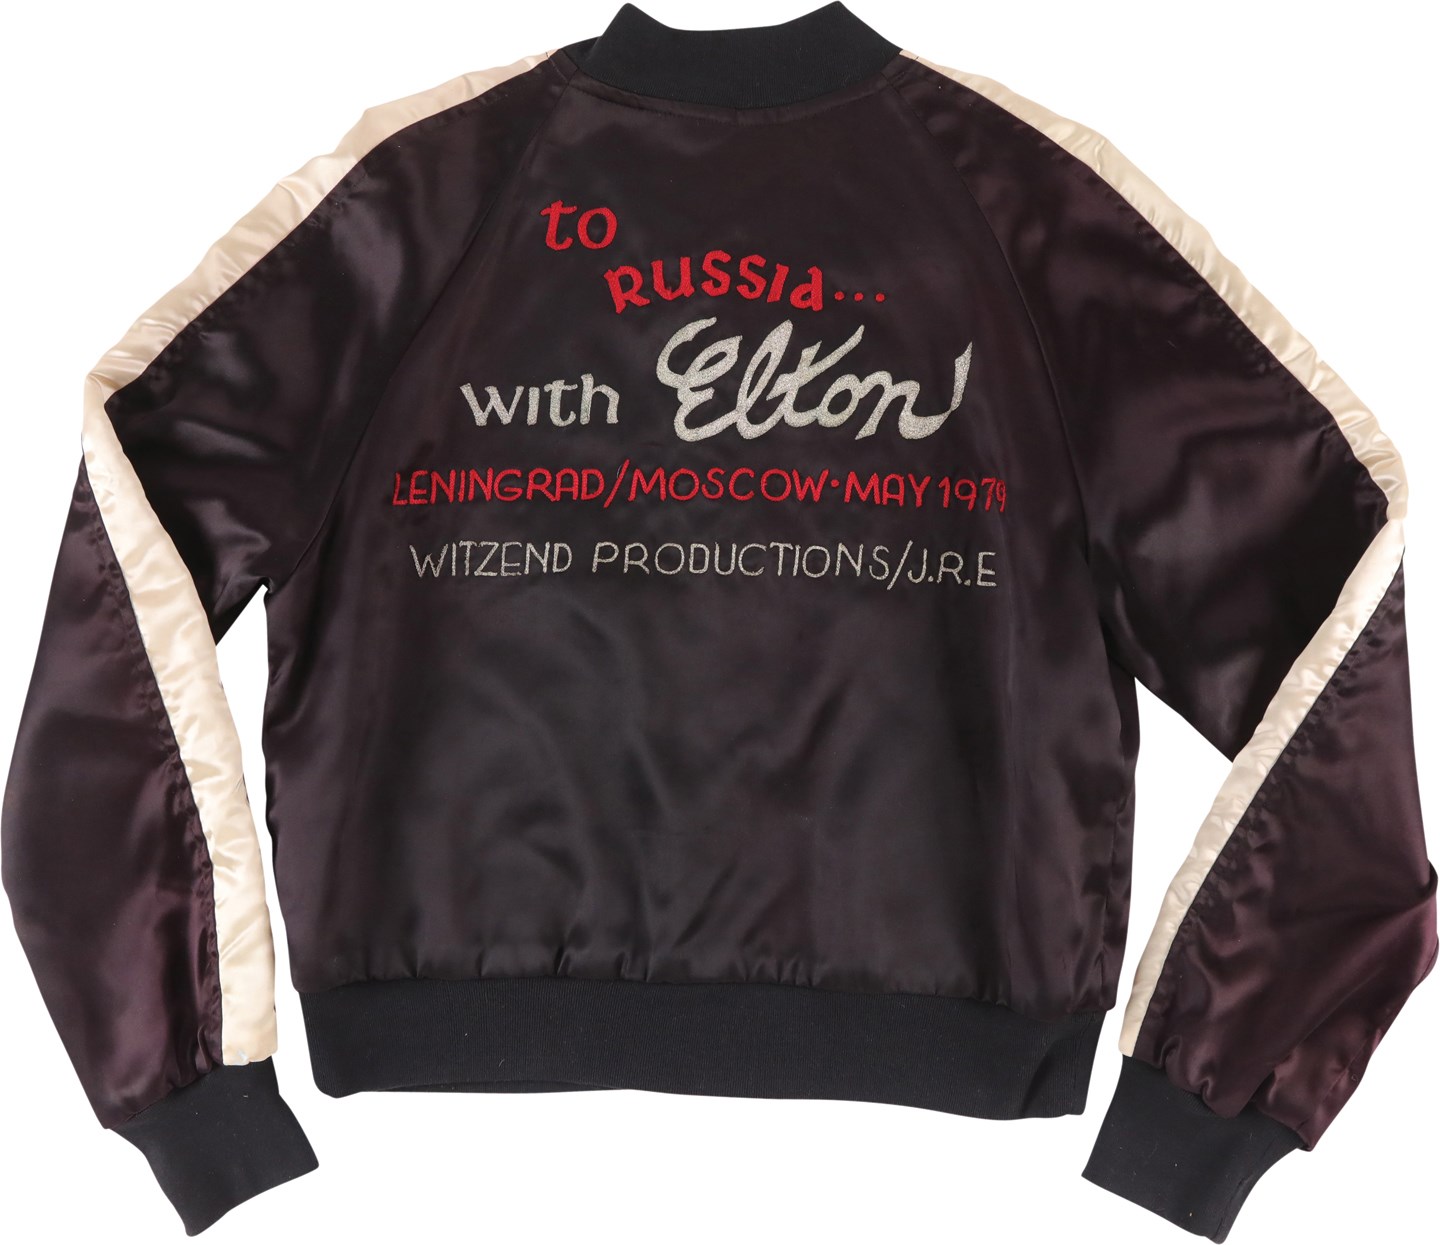 Rock And Pop Culture - Vary Rare 1979 Elton John "To Russia with Elton" Tour Jacket